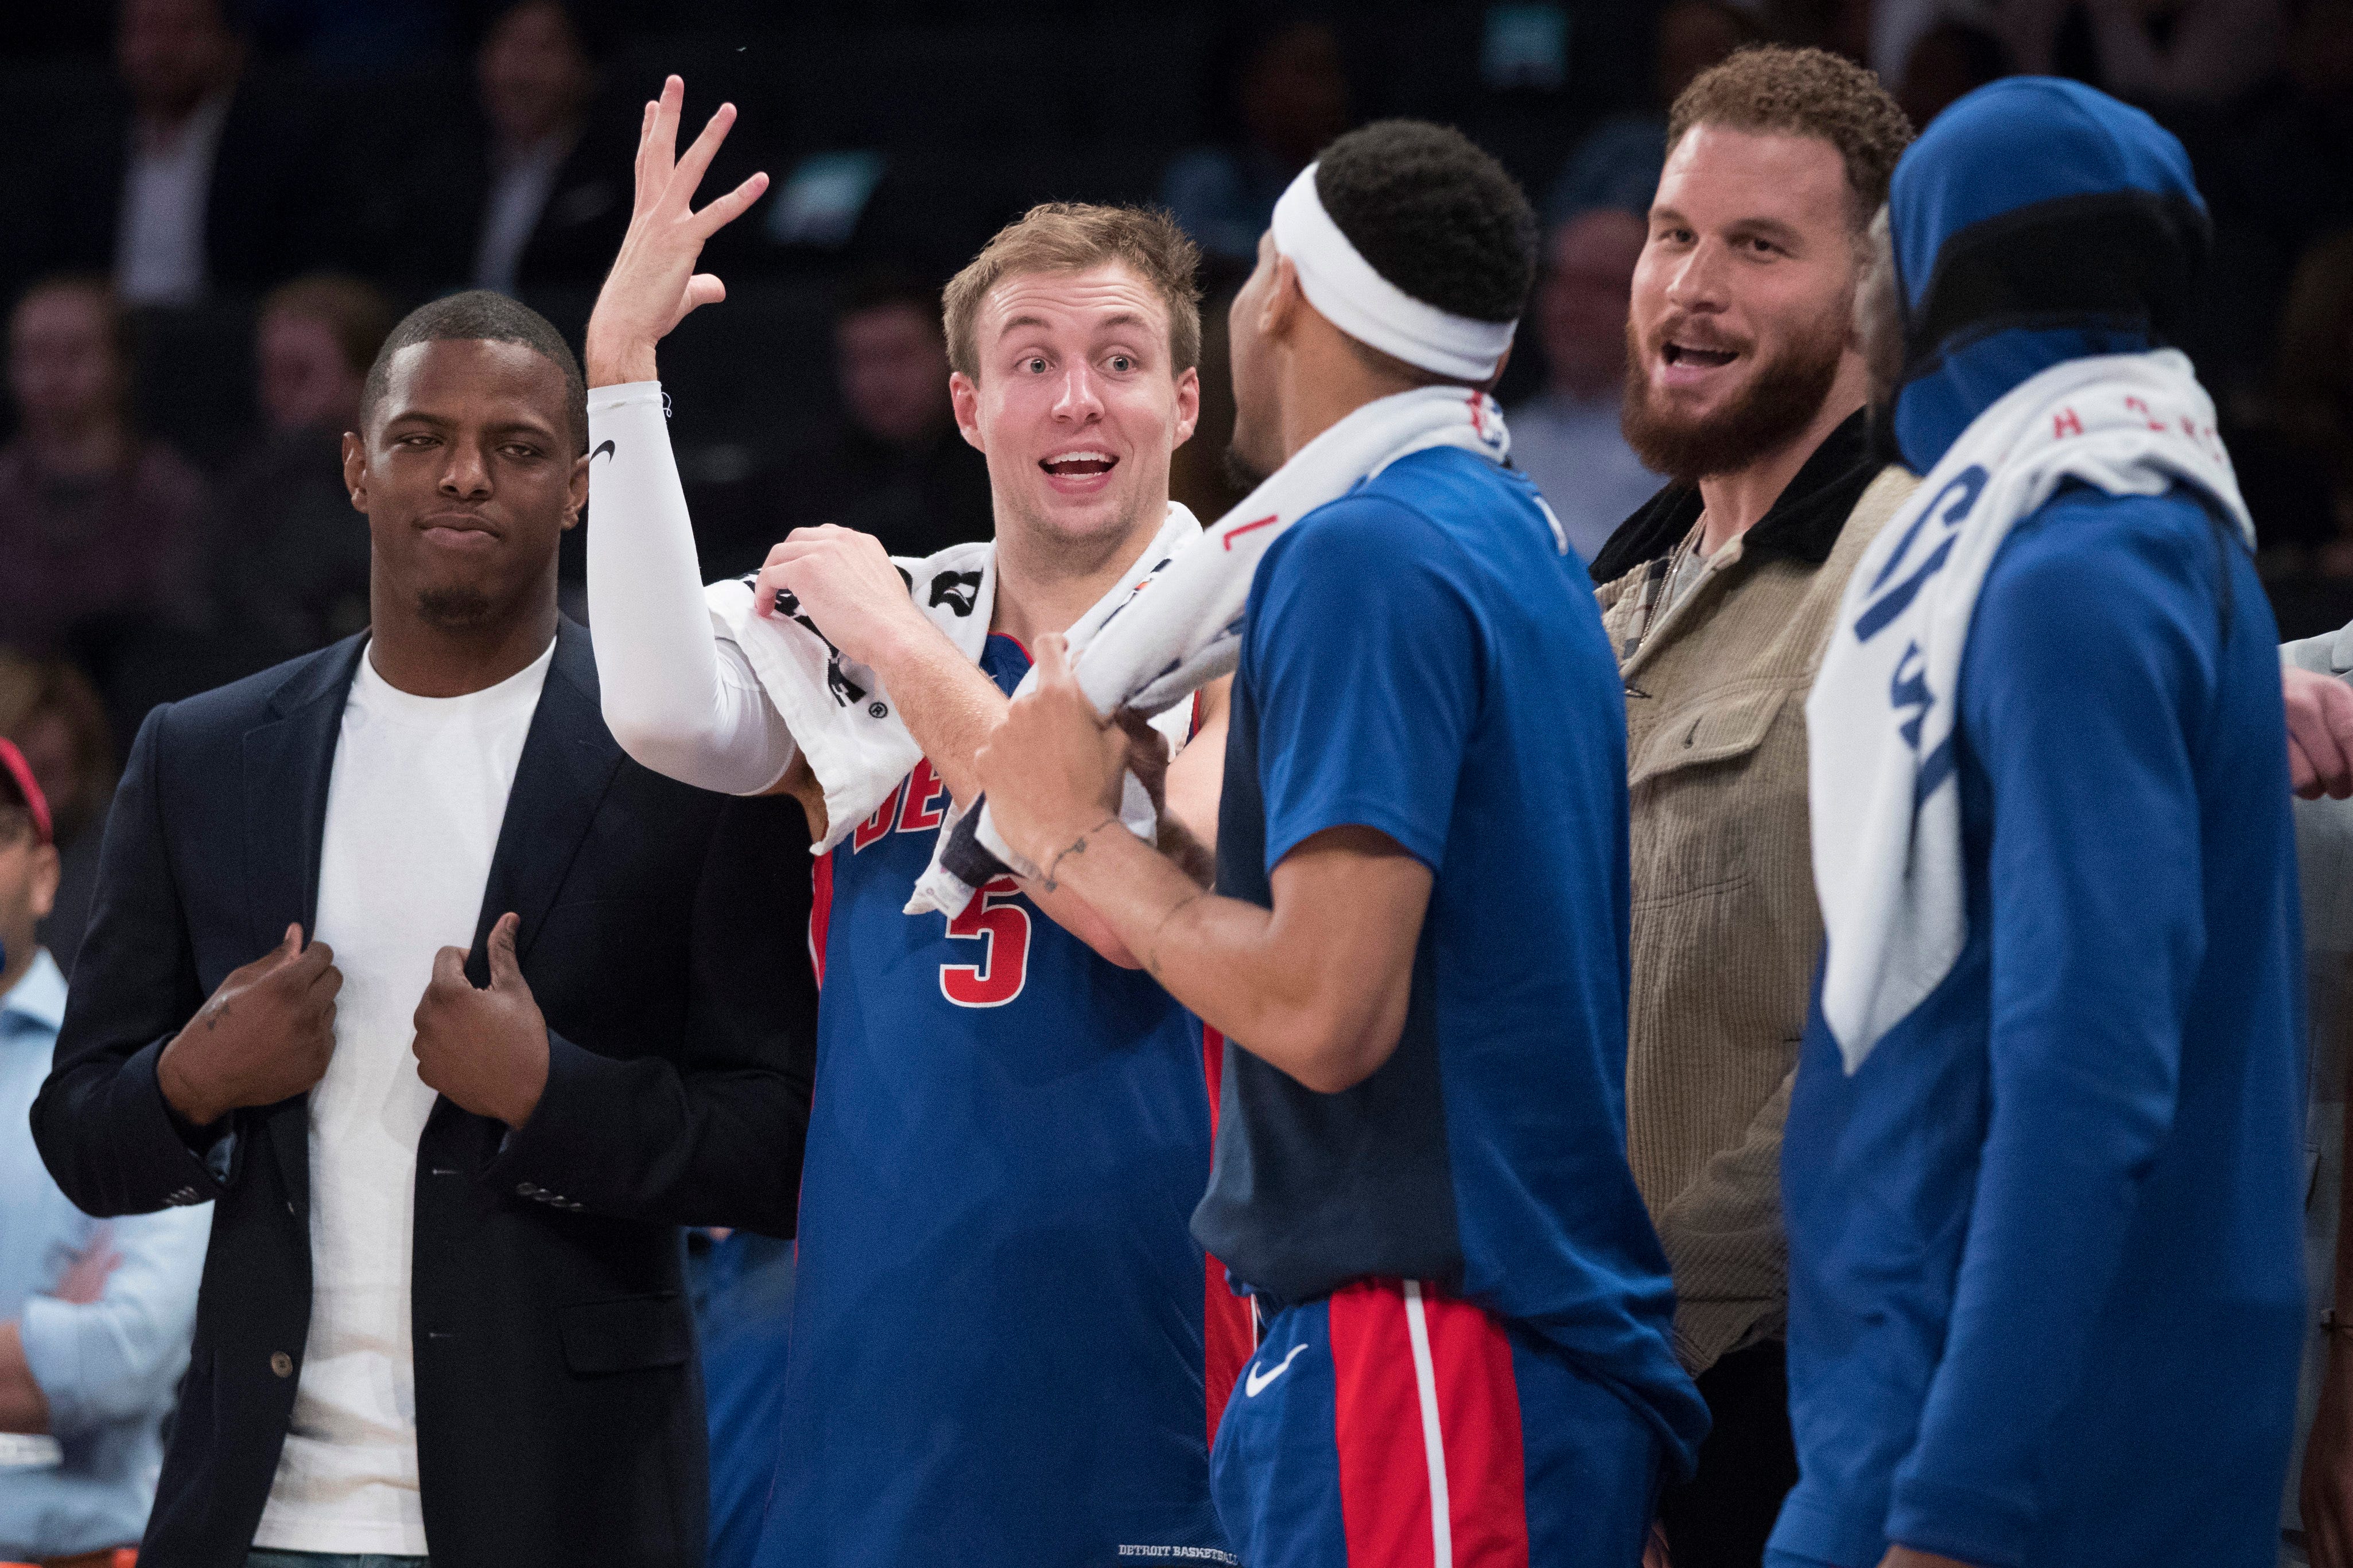 Detroit Pistons guard Luke Kennard (5) celebrates with teammates at the bench in the final seconds of the game.